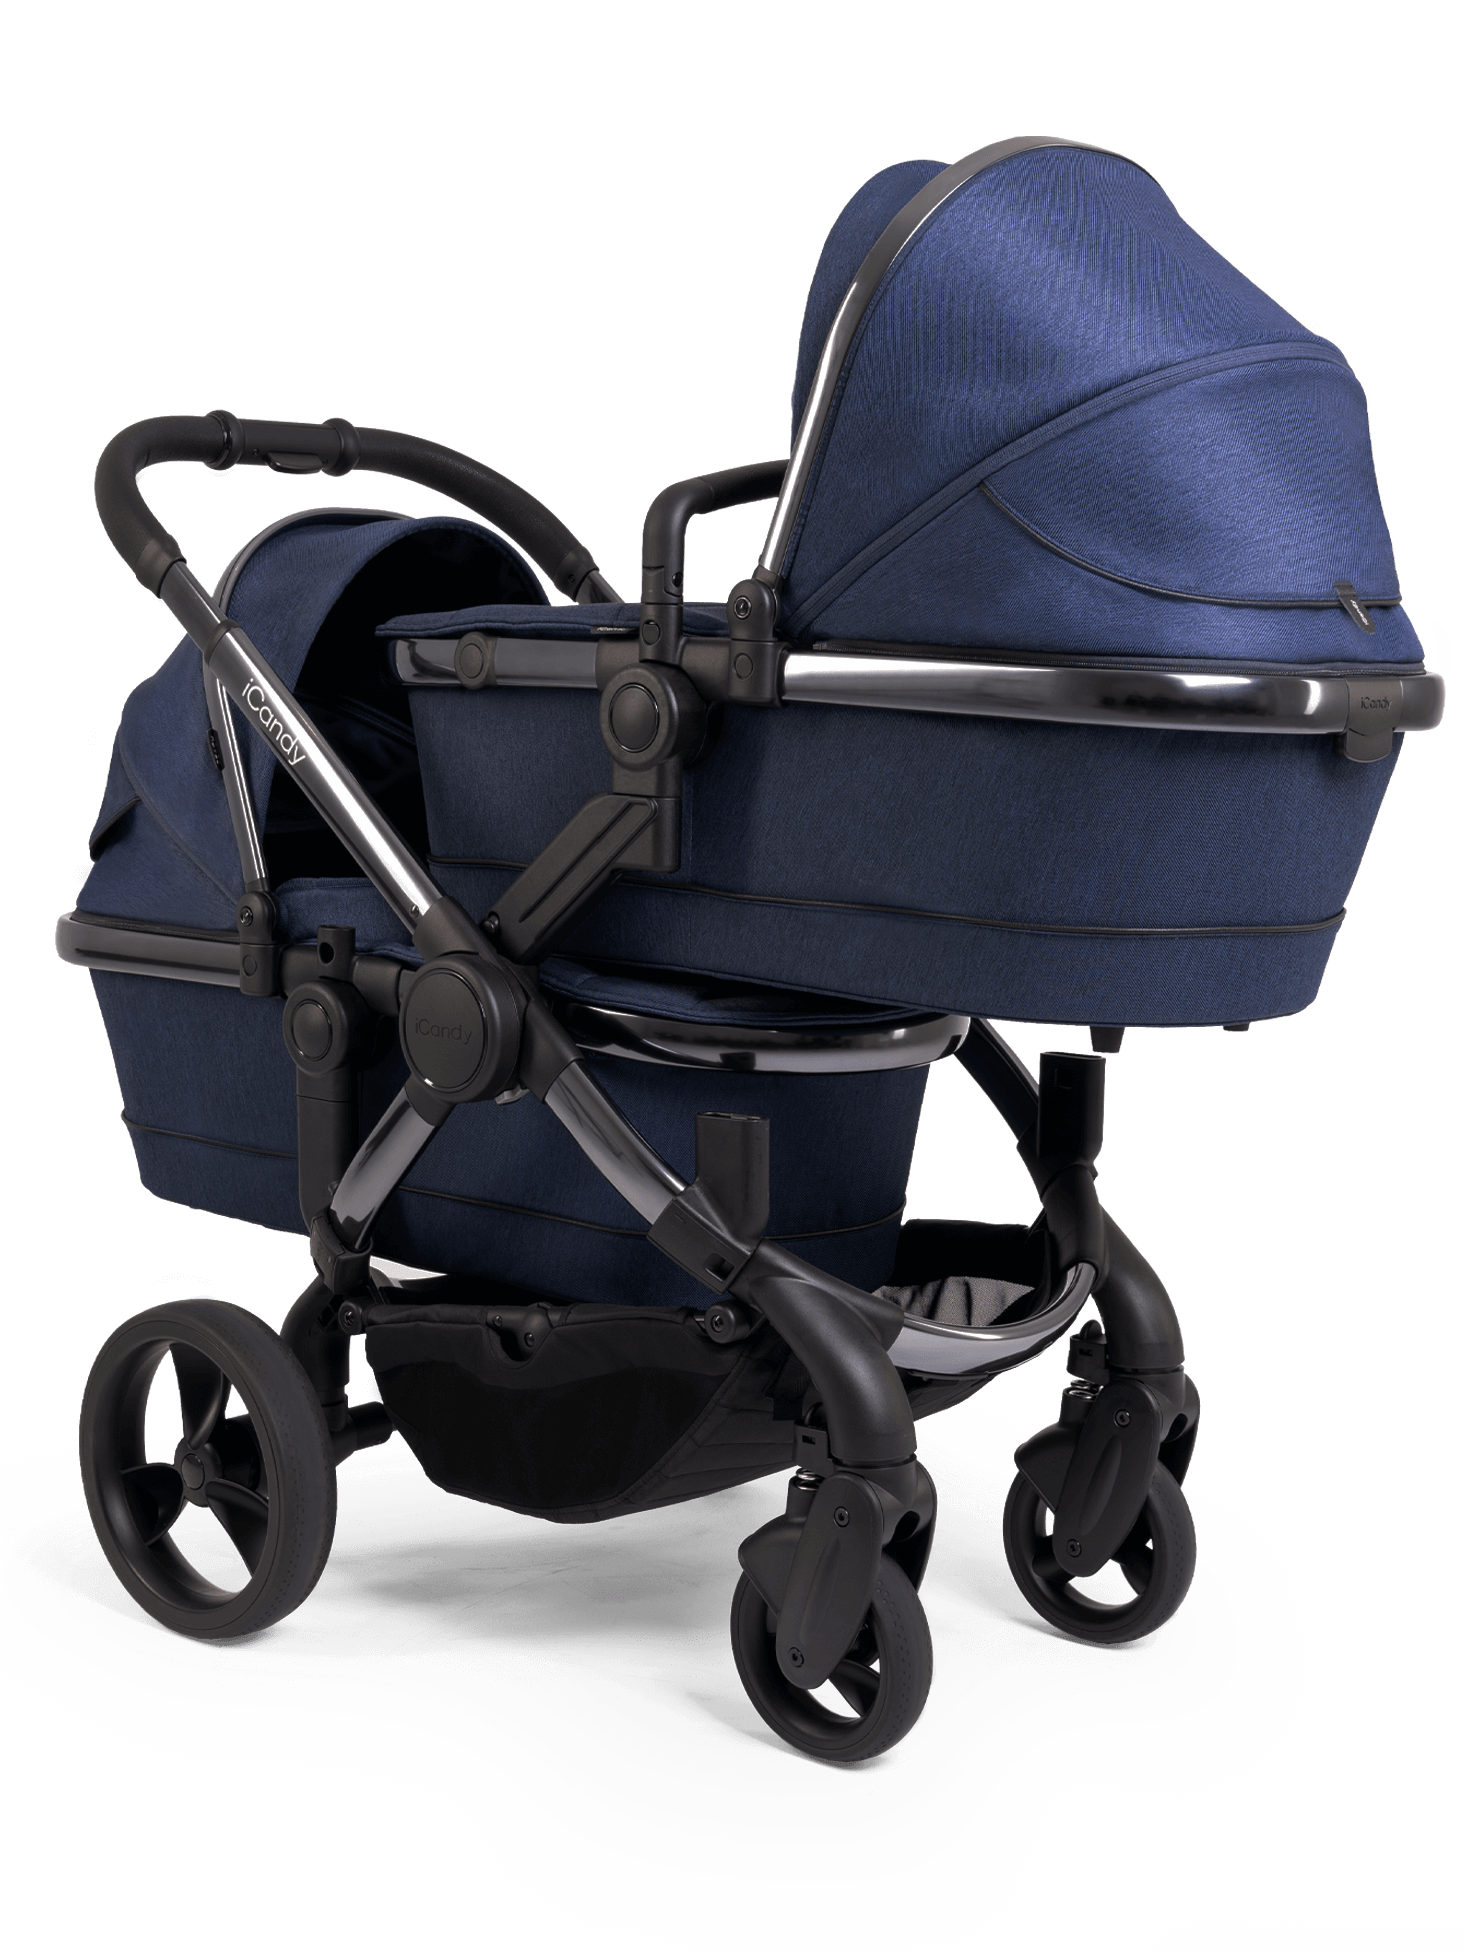 IC2383 iCandy Peach Phantom Navy Check Pushchair & Carrycot Set with Bag